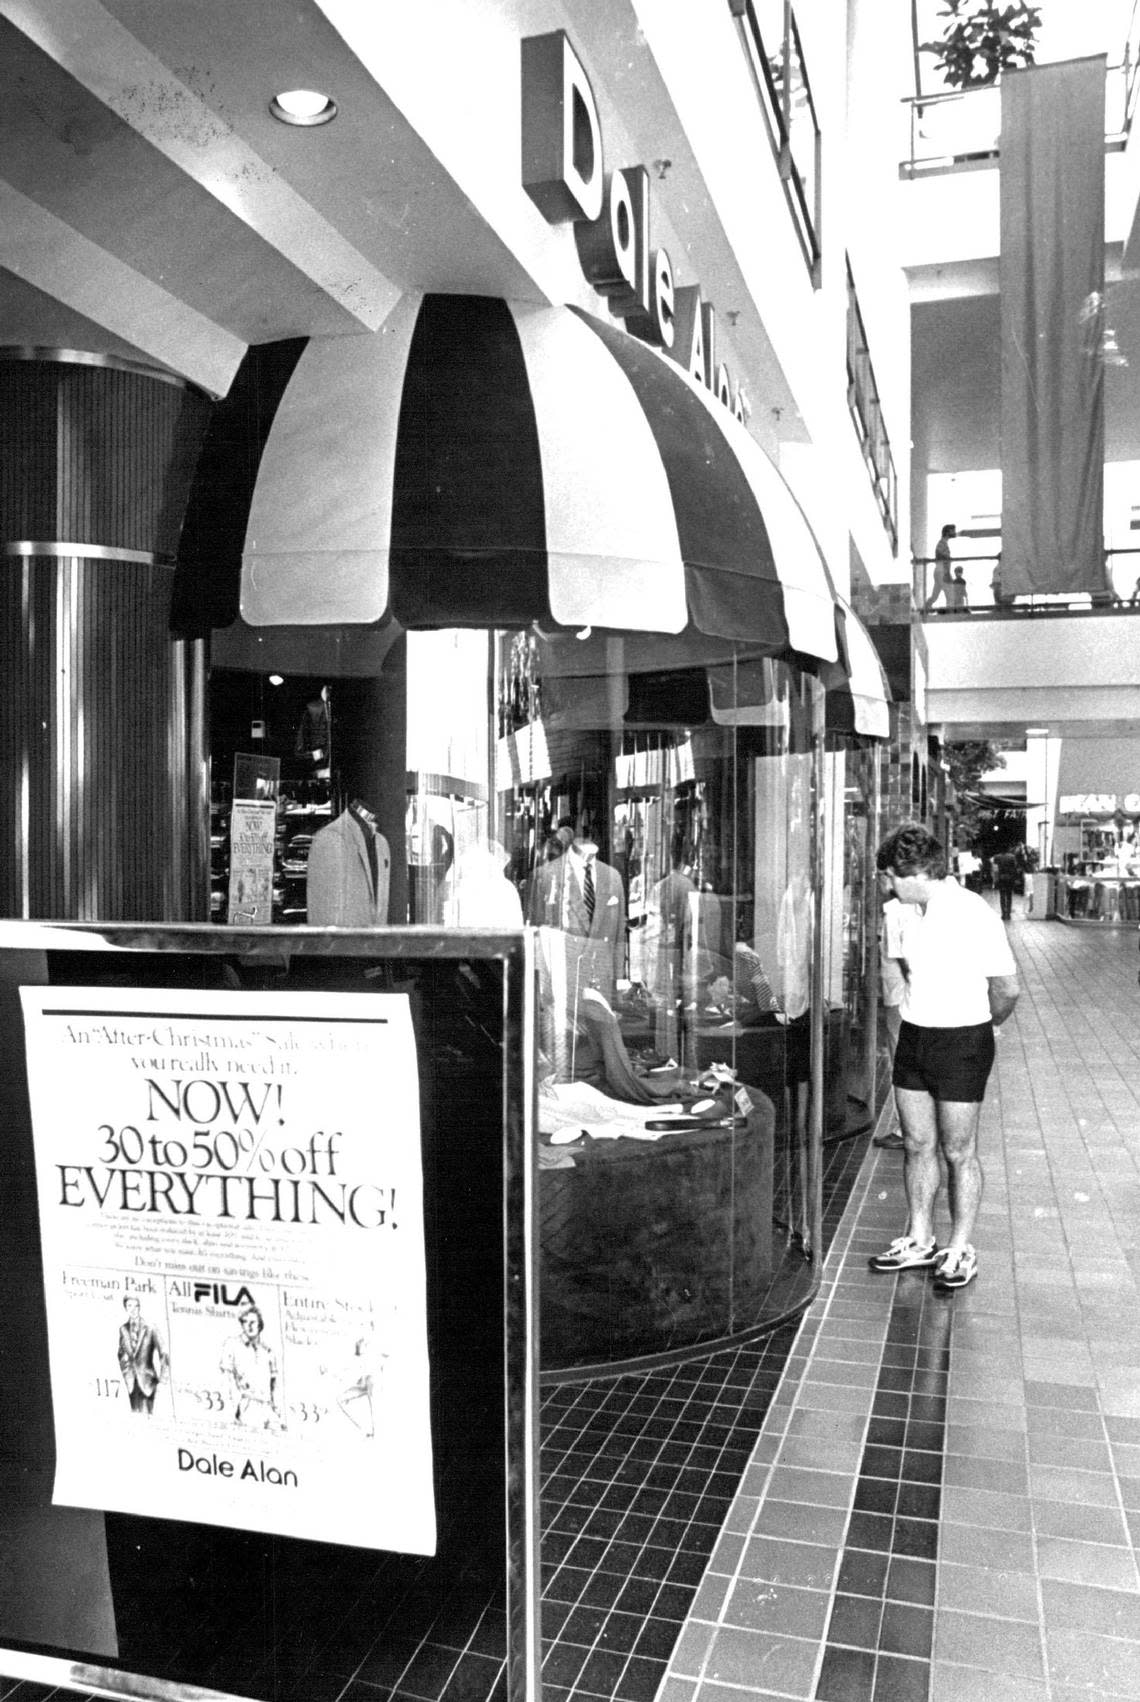 File photo of The Mall at 163rd Street Mall and a clearance sale at the Dale Alan men’s clothing store. Dale Alan closed its 163rd Street store in the mid-1980s. Tim Chapman/Miami Herald file